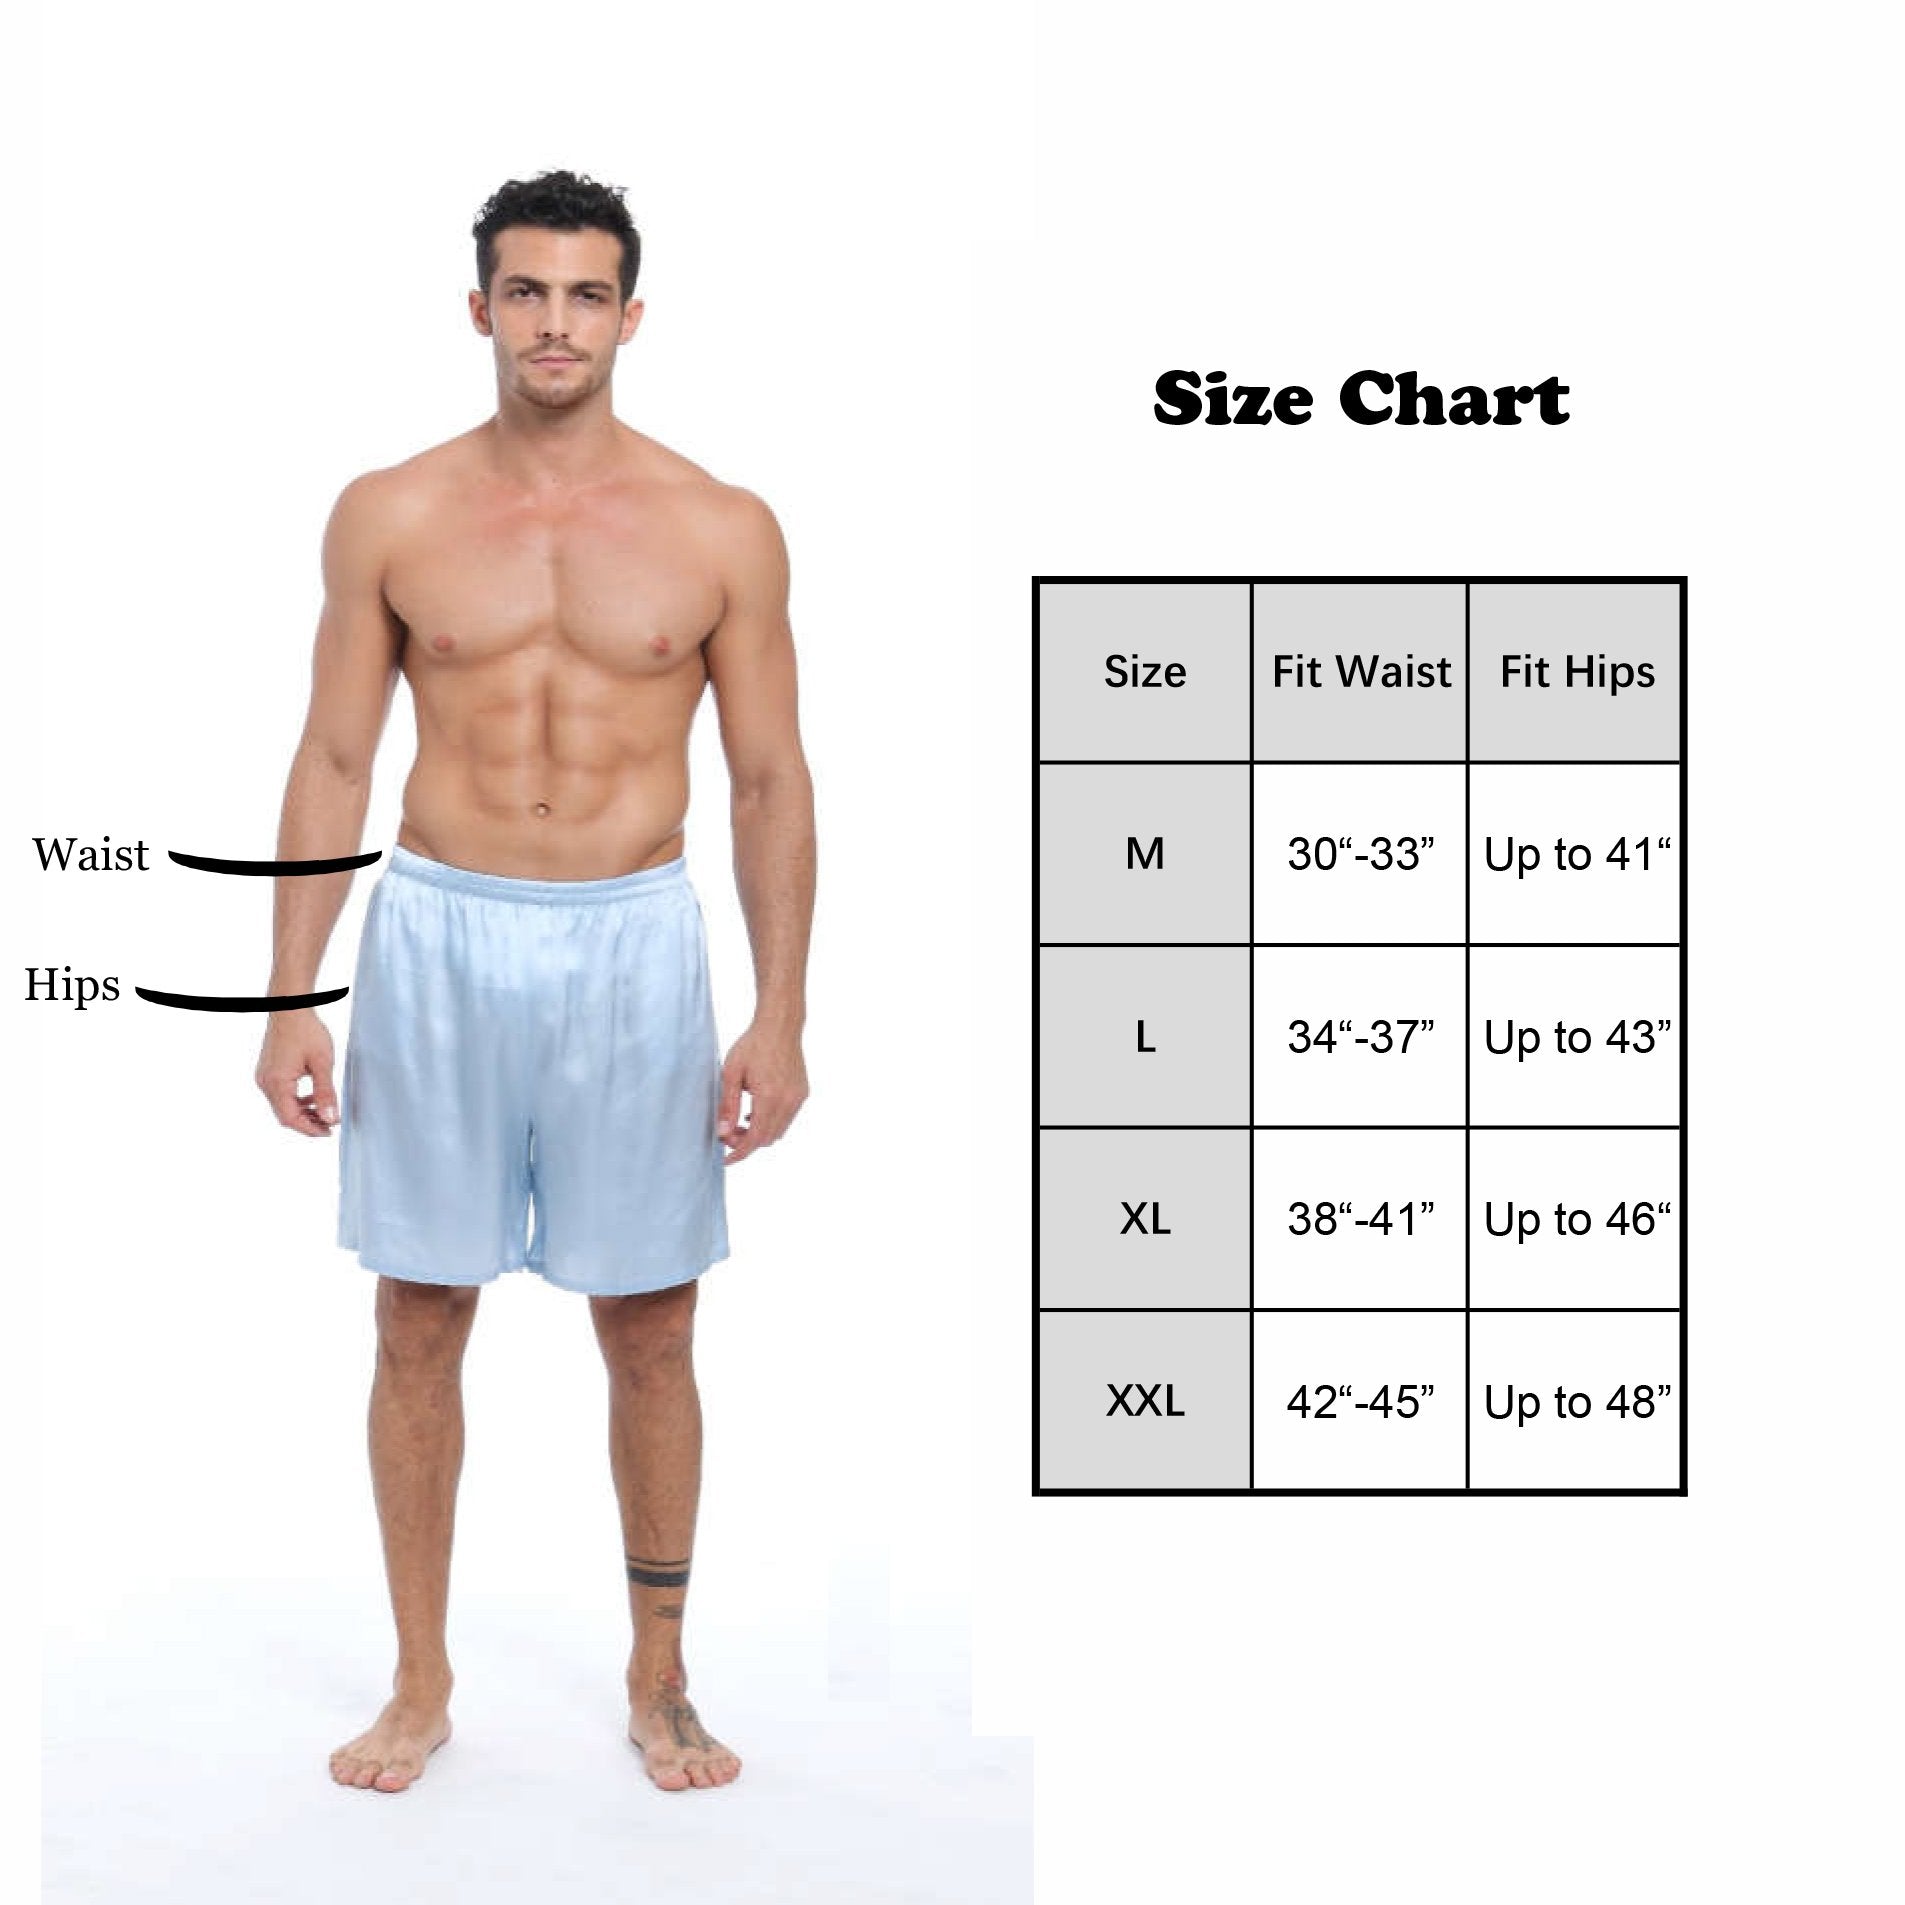 MANSPHIL Men's Silk White Blue Boxers Shorts with Pockets, Letter Print  Mulberry Silk Underwear Brief Sleep Shorts Lounge Pajamas, Small at   Men's Clothing store